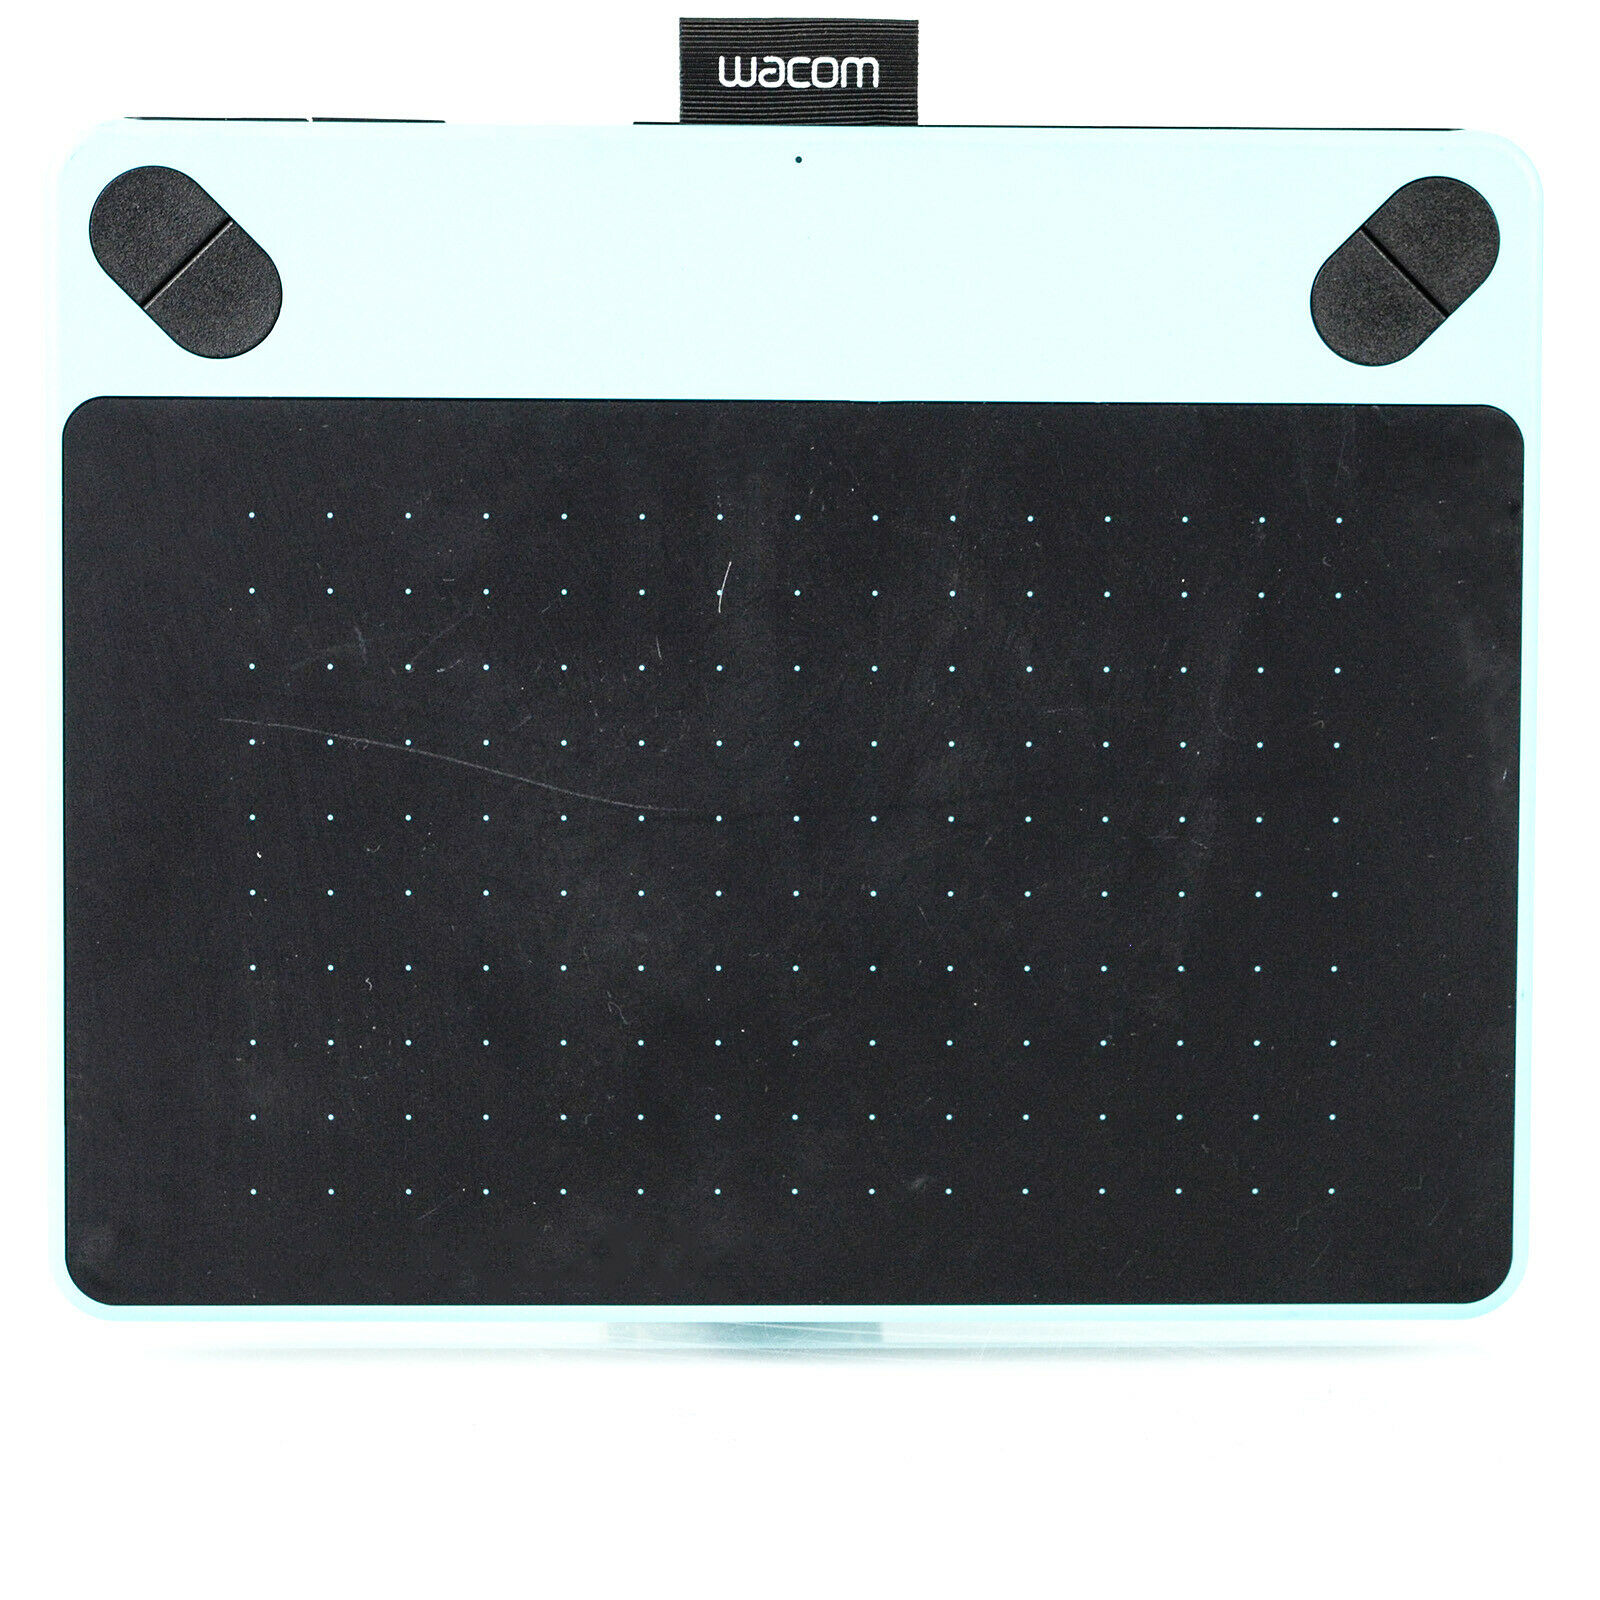 Wacom Intuos Draw CTL-490/B0 Mint Blue Creative Pen Digital Touch Tablet ONLY